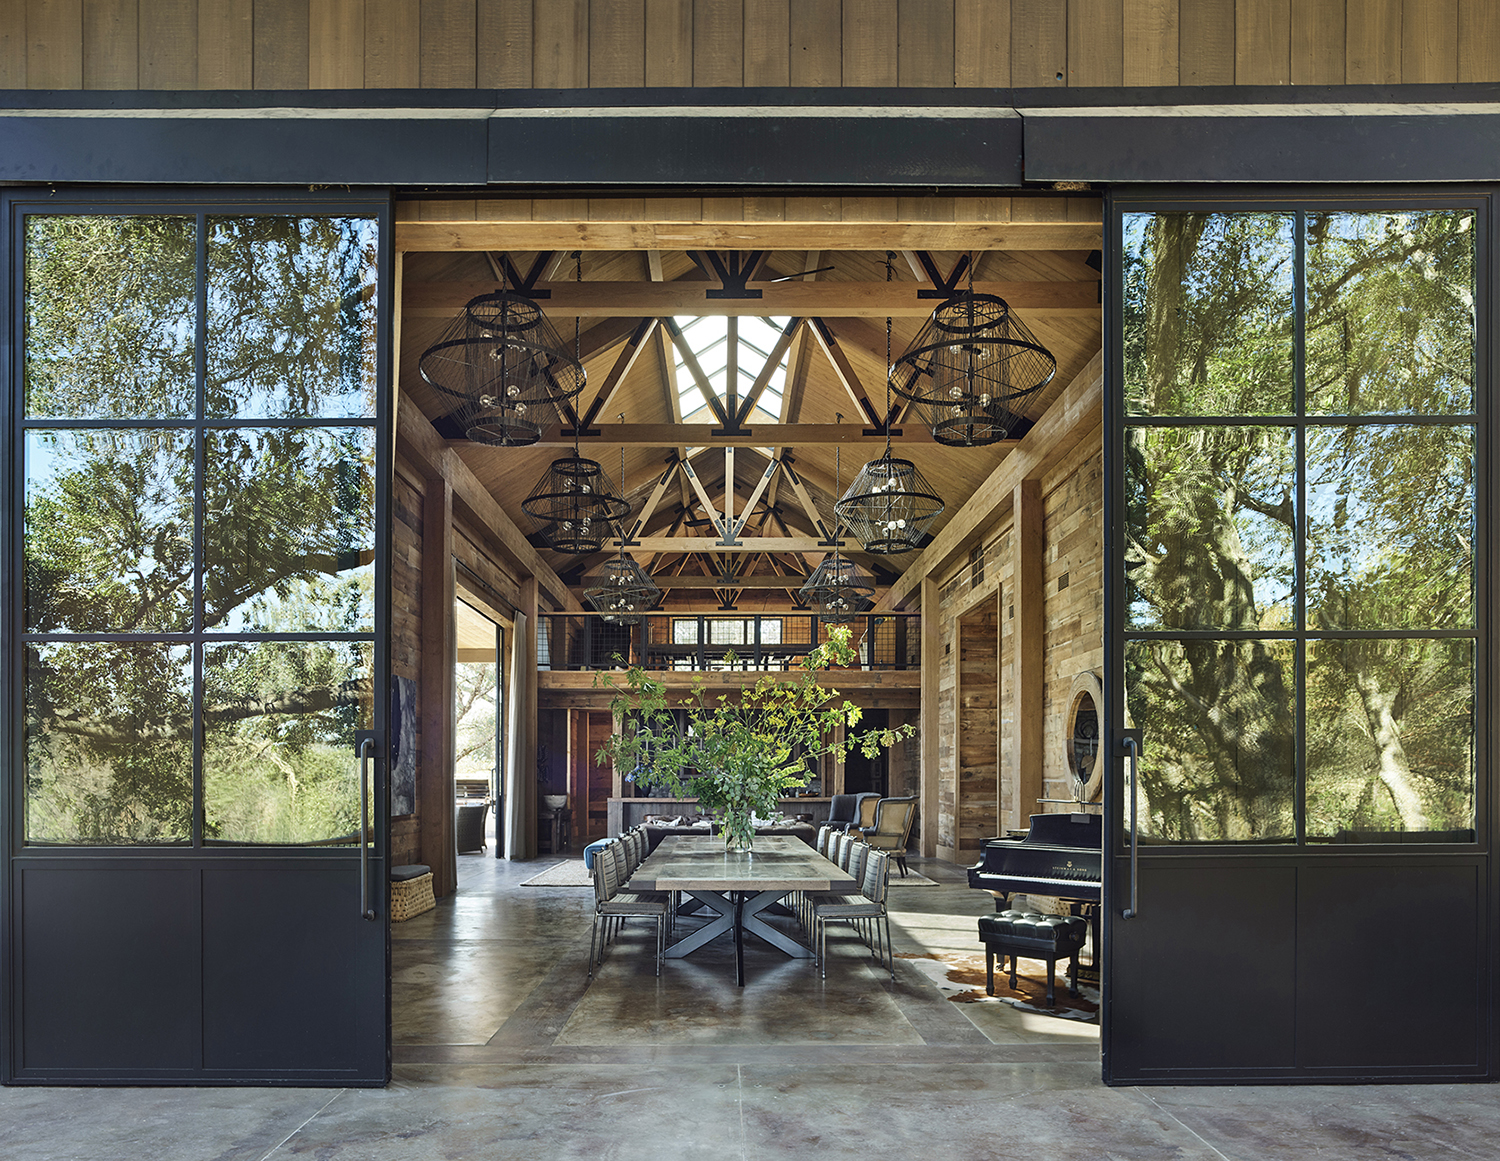 Jennifer-Robin-Interiors-Projects-Party-Barn-1-Entrance-Dining-Room